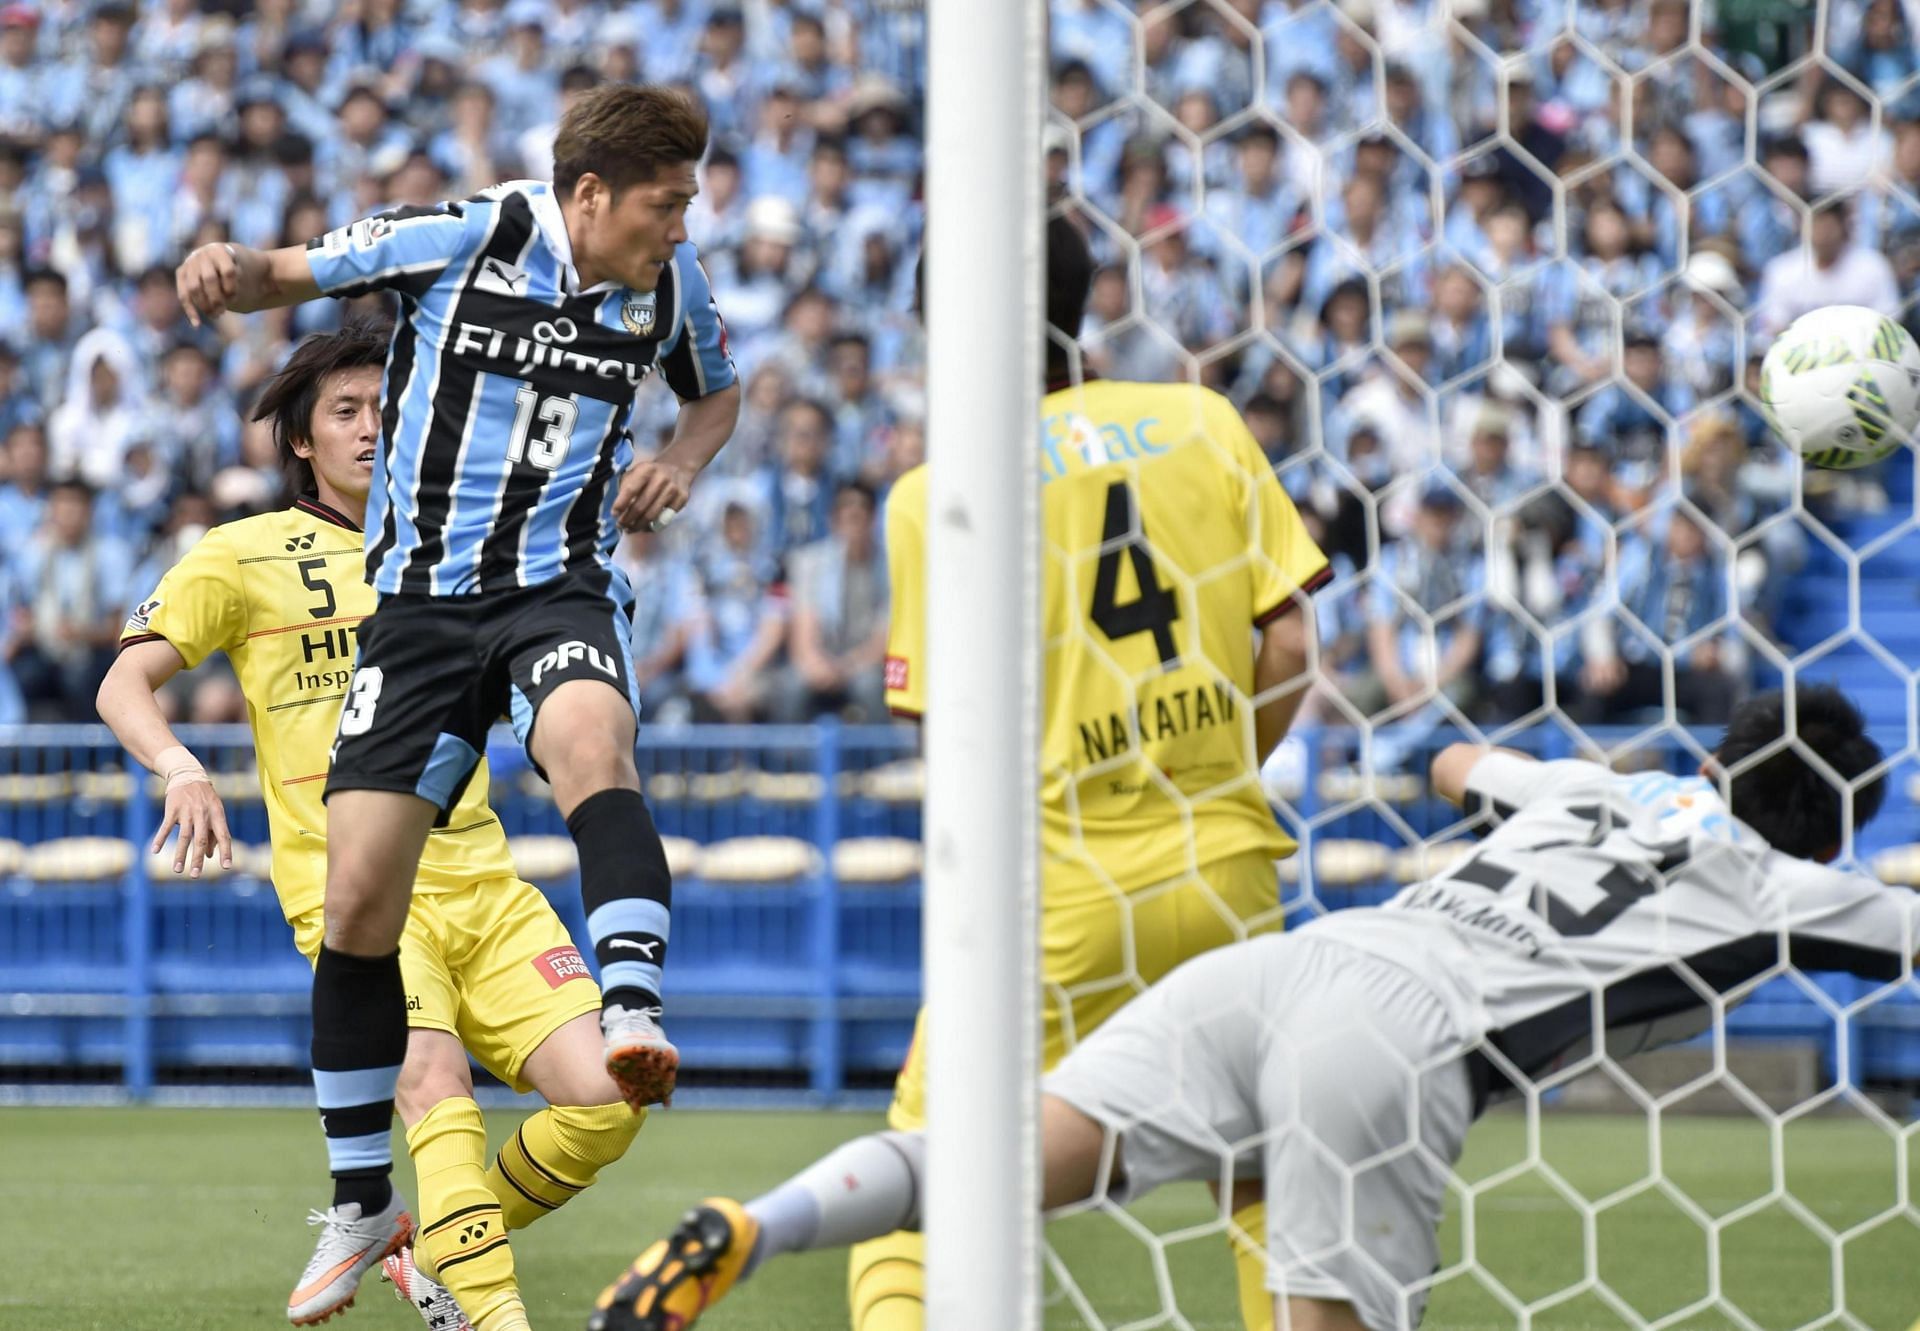 Kawasaki Frontale square off against Kashiwa Reysols in their upcoming J1 League fixture